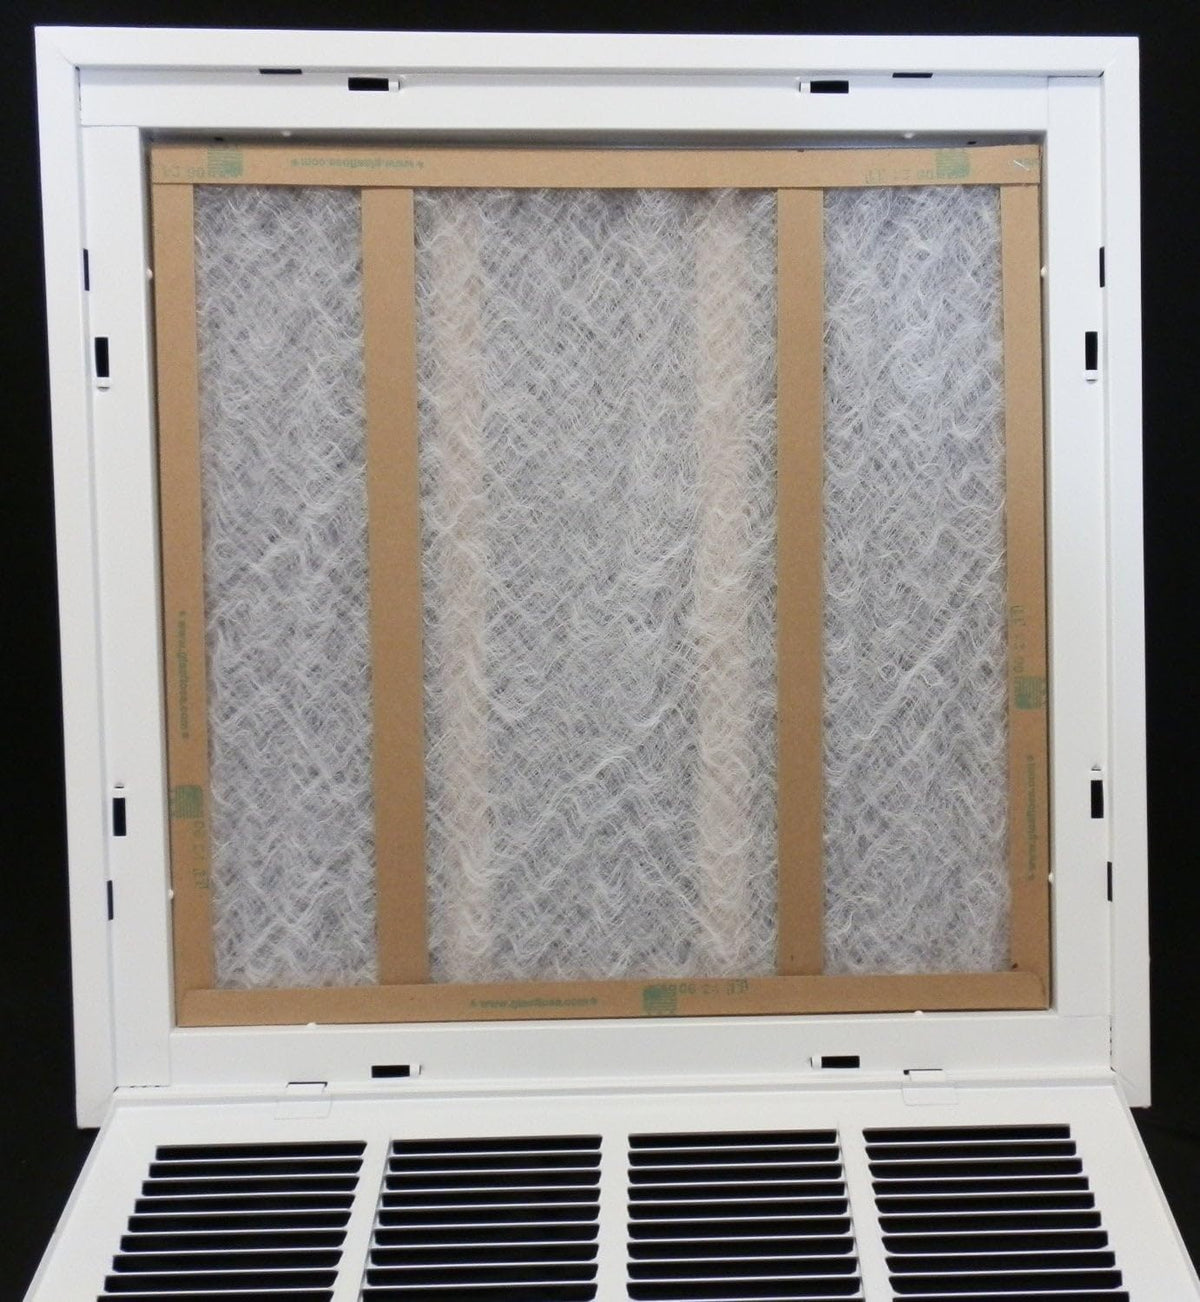 18&quot; X 12&quot; Steel Return Air Filter Grille for 1&quot; Filter - Removable Frame - [Outer Dimensions: 20 5/8&quot; X 14 5/8&quot;]